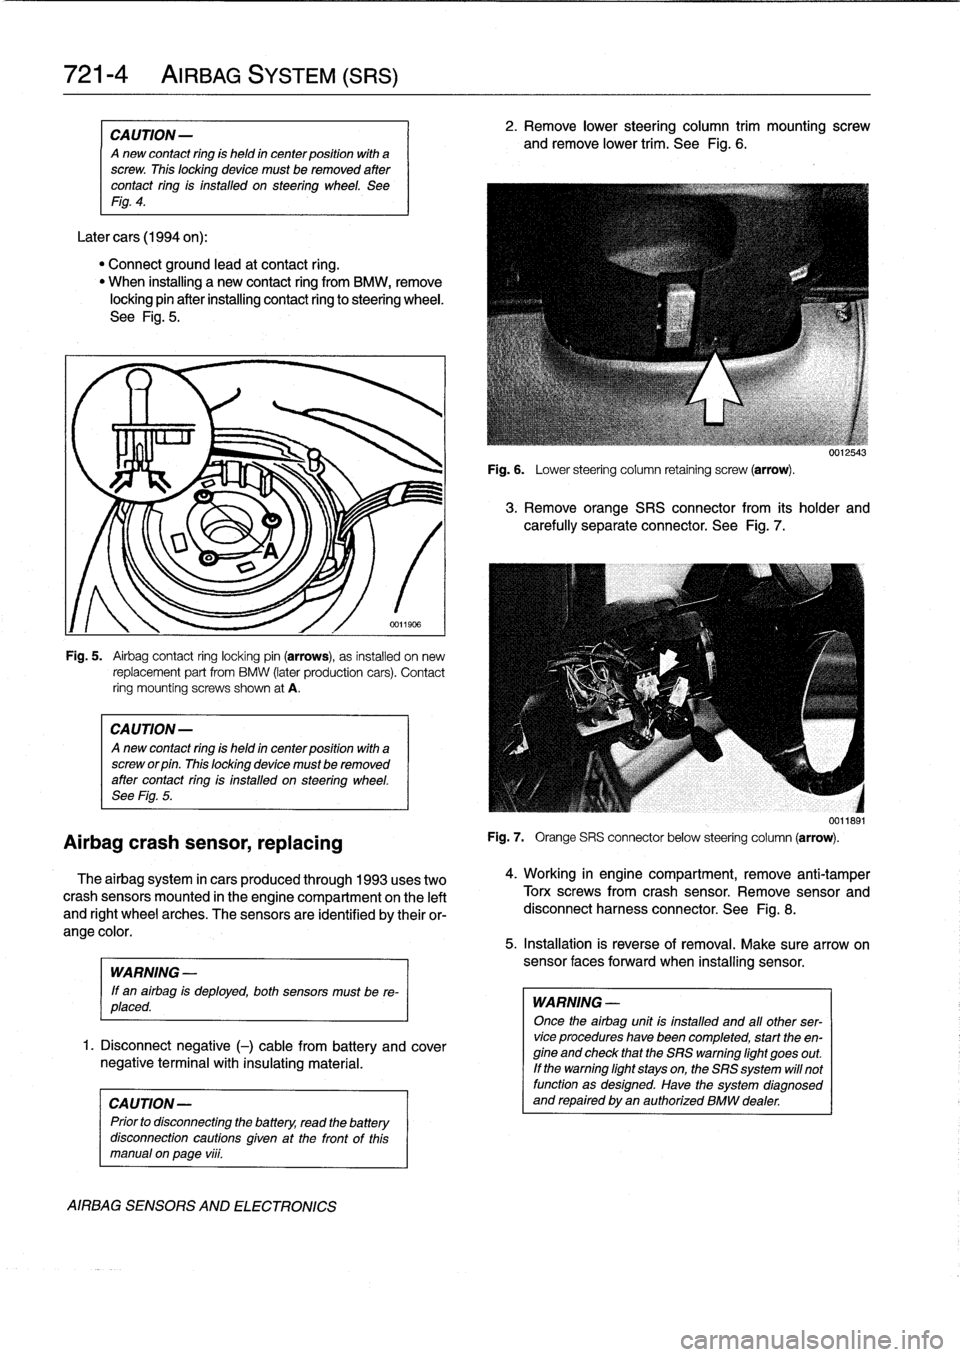 BMW 325i 1992 E36 Repair Manual 
721-
4

	

AIRBAG
SYSTEM
(SRS)

CAUTION-

A
new
contact
ring
is
held
in
center
position
with
a
screw
.
This
locking
device
must
be
removed
after
contact
ring
is
installed
on
steering
wheel
.
See
Fig
